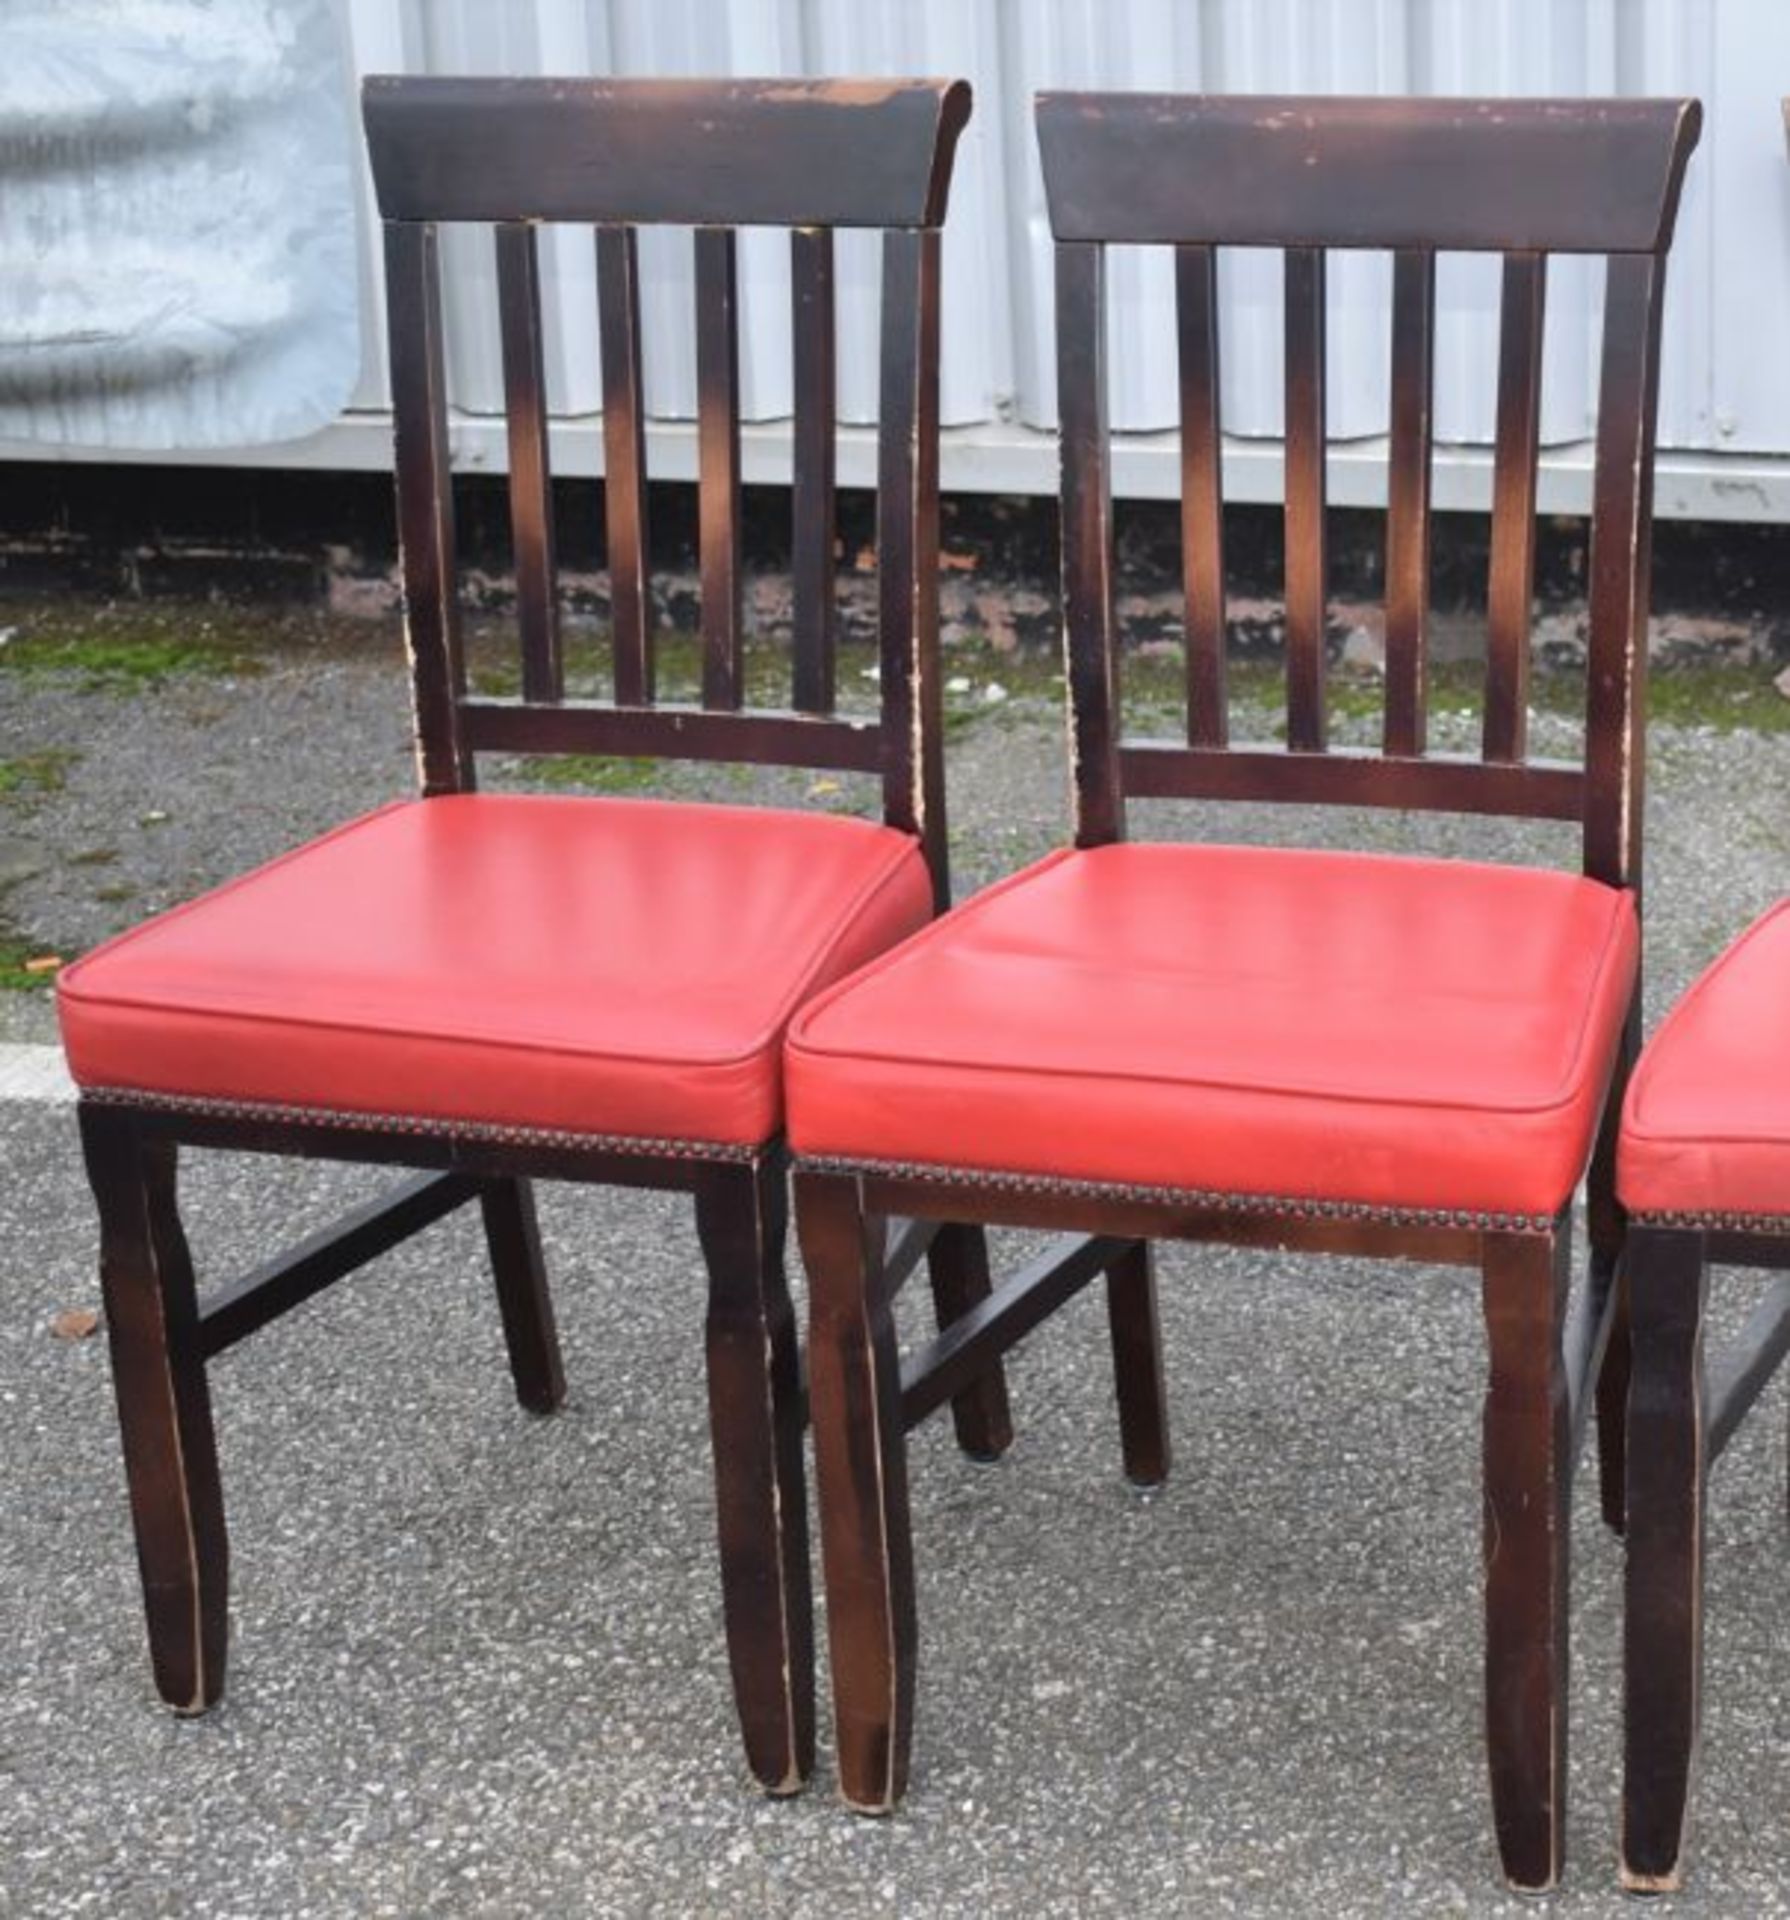 8 x Restaurant Dining Chairs With Dark Stained Wood Finish and Red Leather Seat Pads - Recently Remo - Image 2 of 6